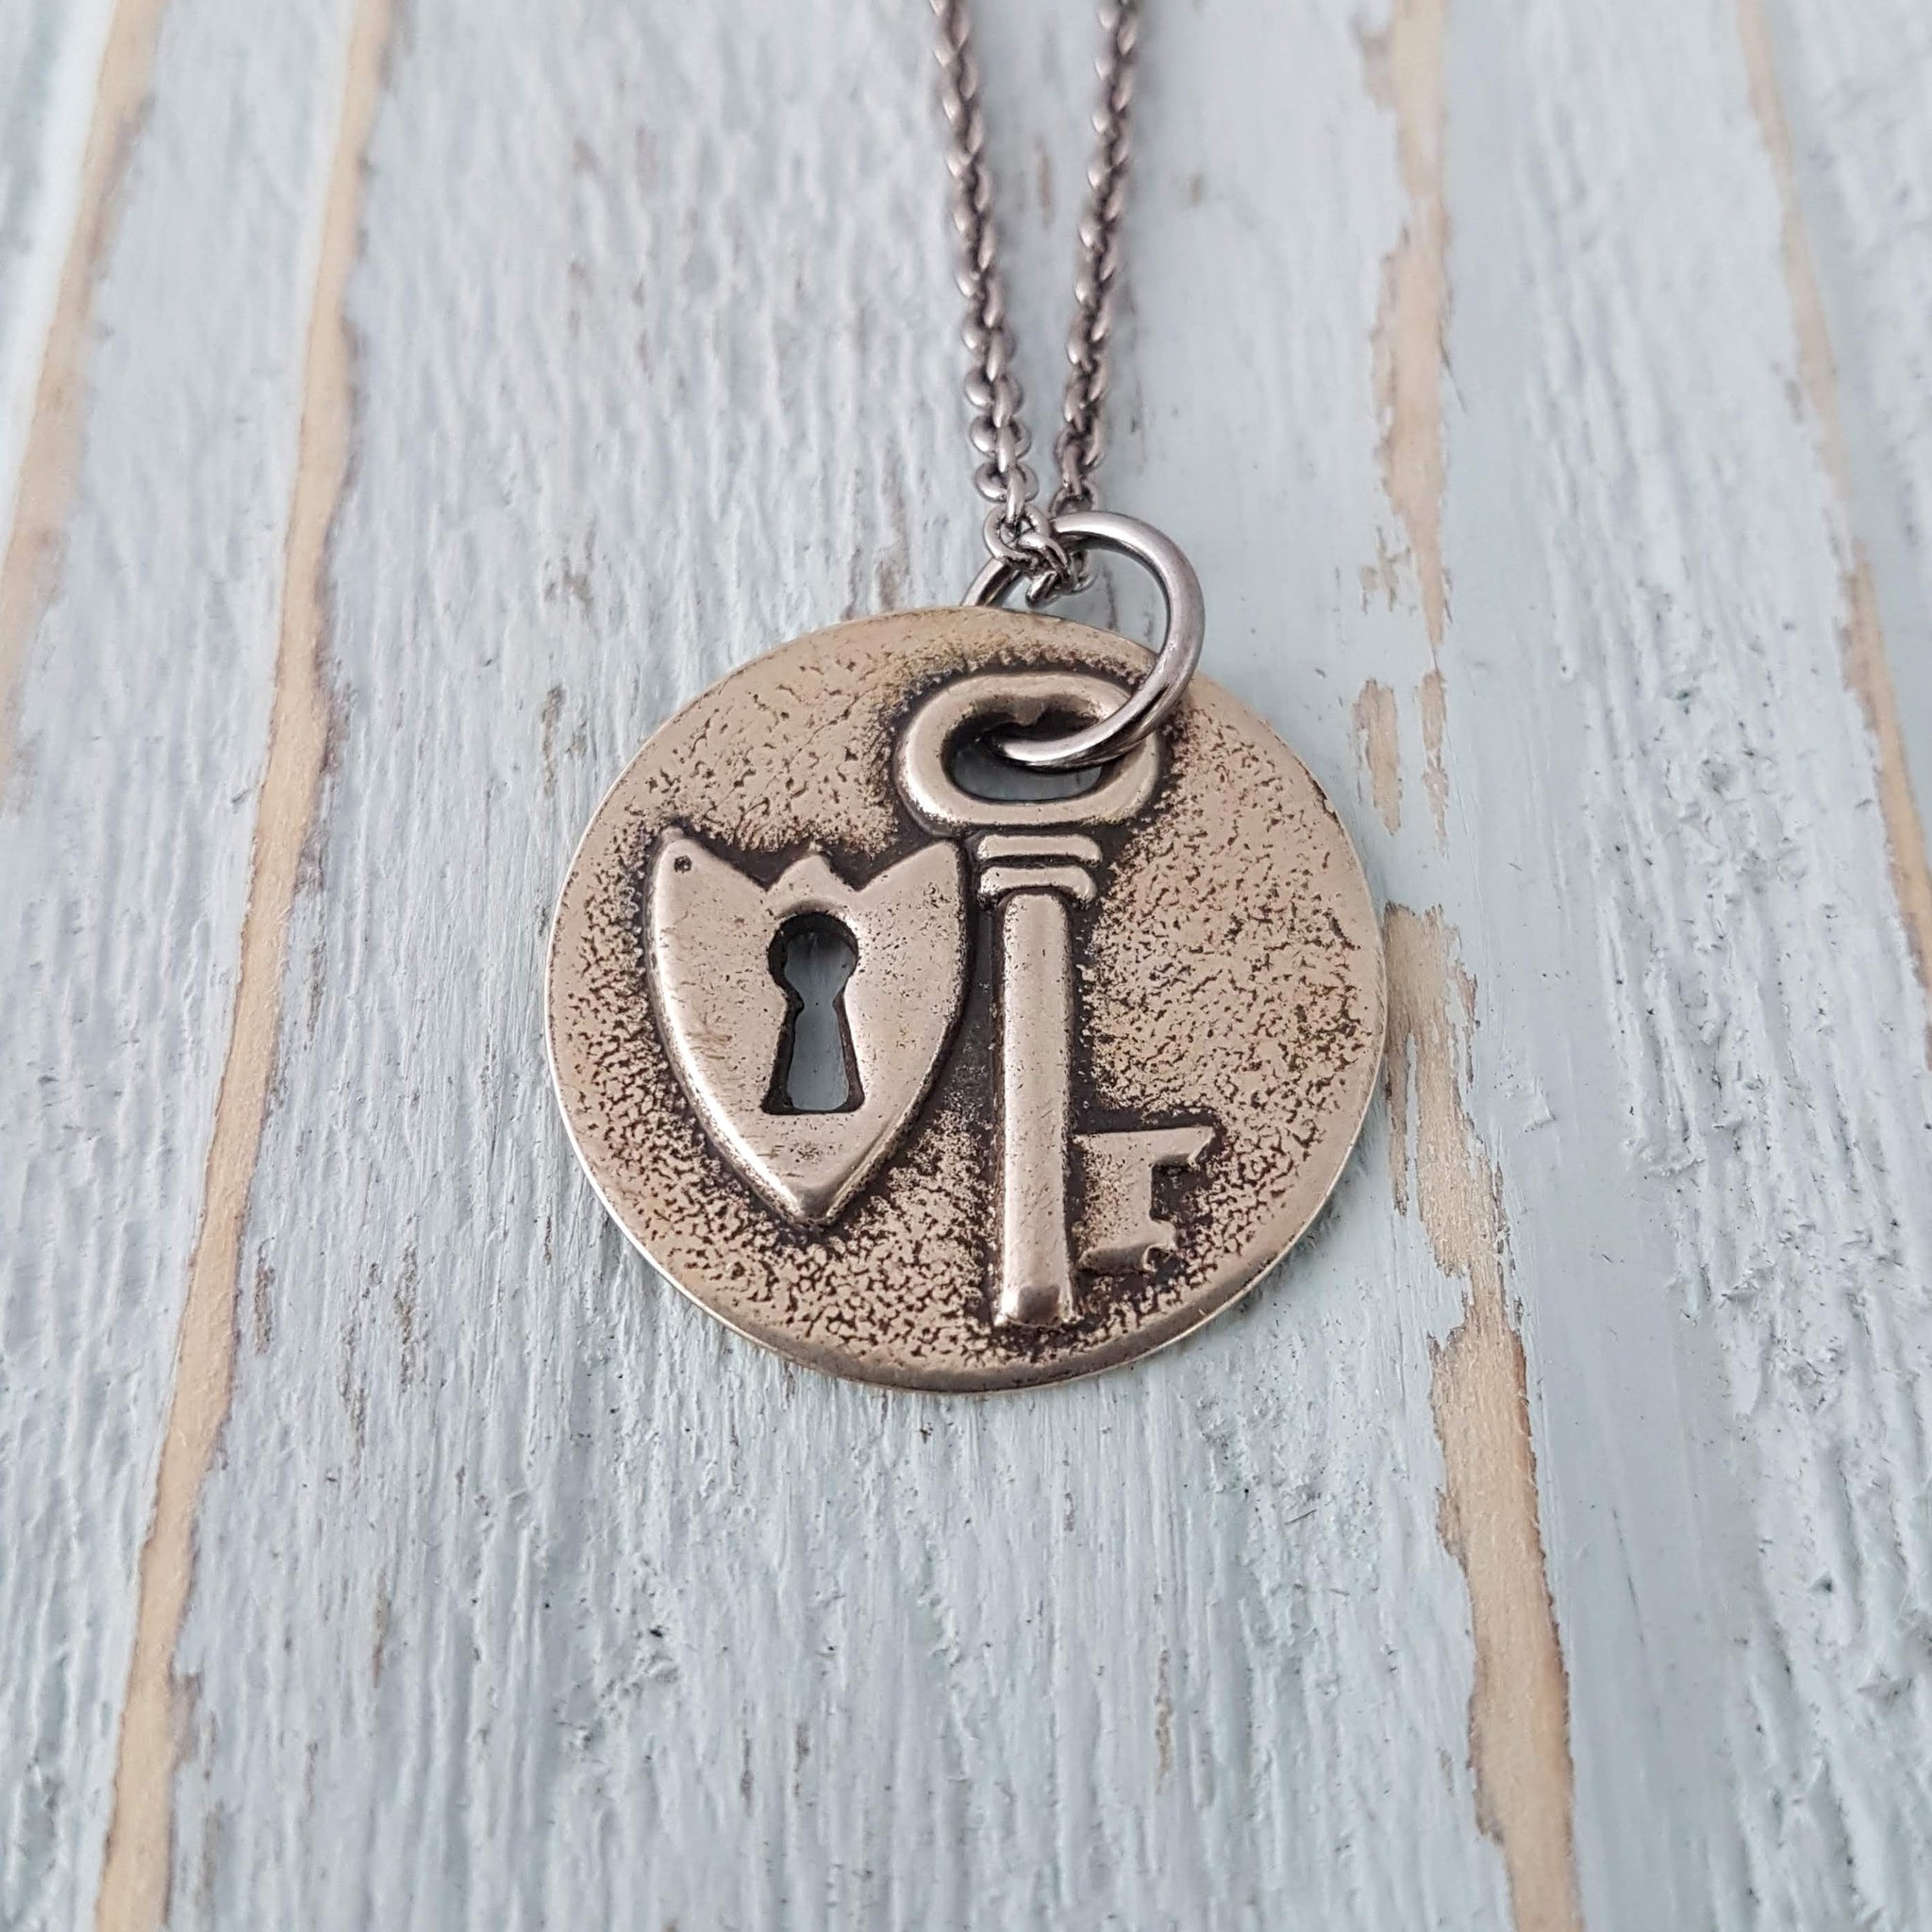 Lock and Key Pendant Necklace